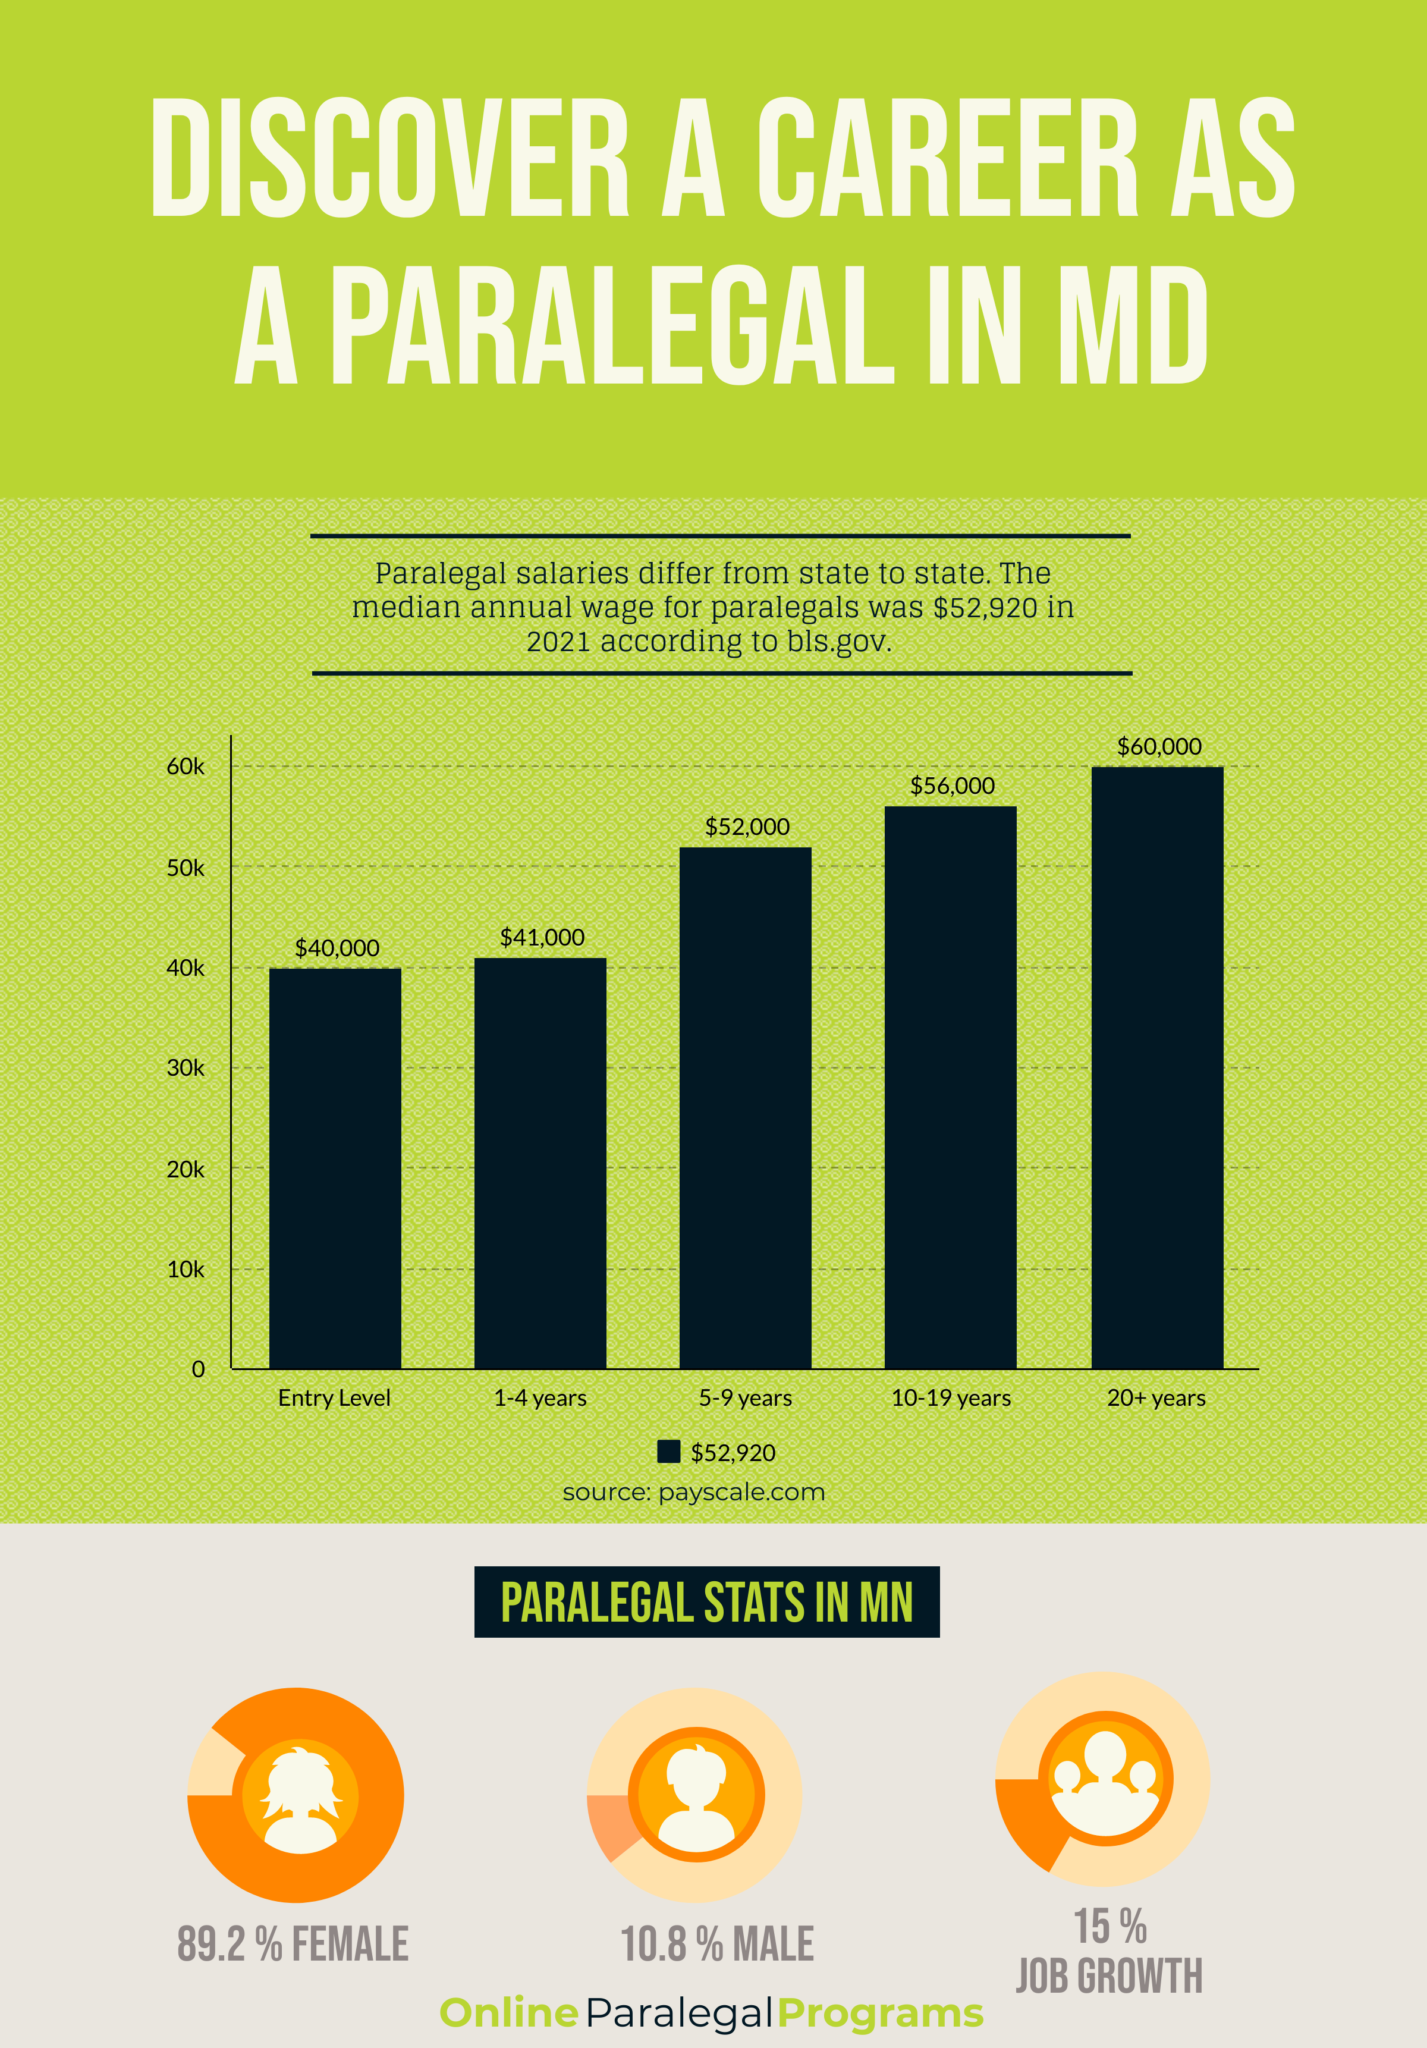 Maryland Paralegal Education Career and Salary Guide Online